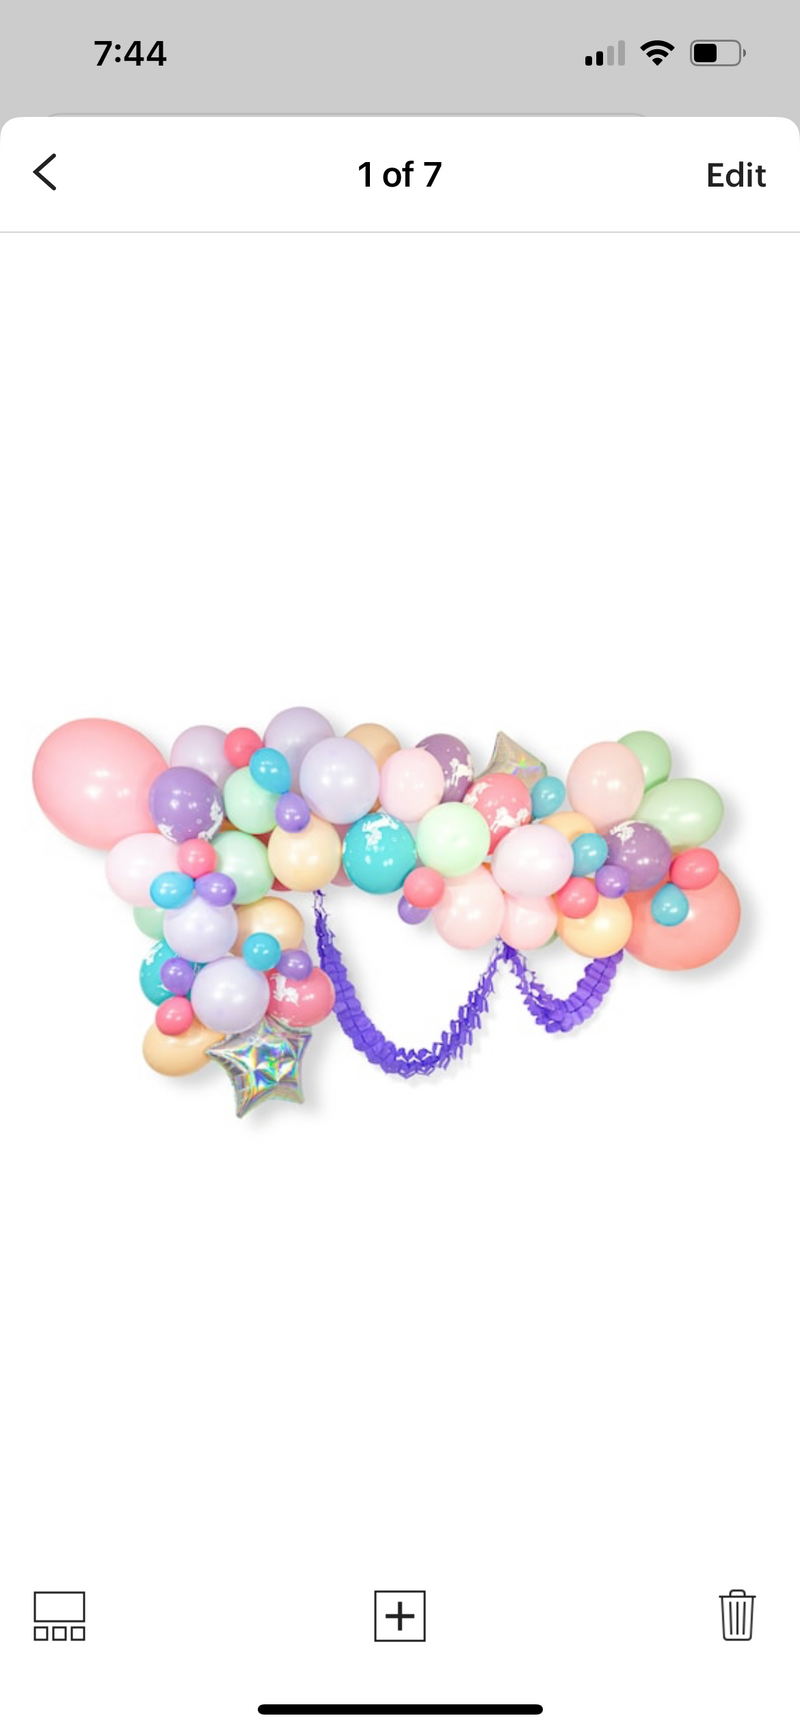 Giant Balloon Garland Kit - Pink Mint Lavender Peach Giant Balloon Arch - “Mythical Tales” XL Girl Party Prop, Unicorn Theme